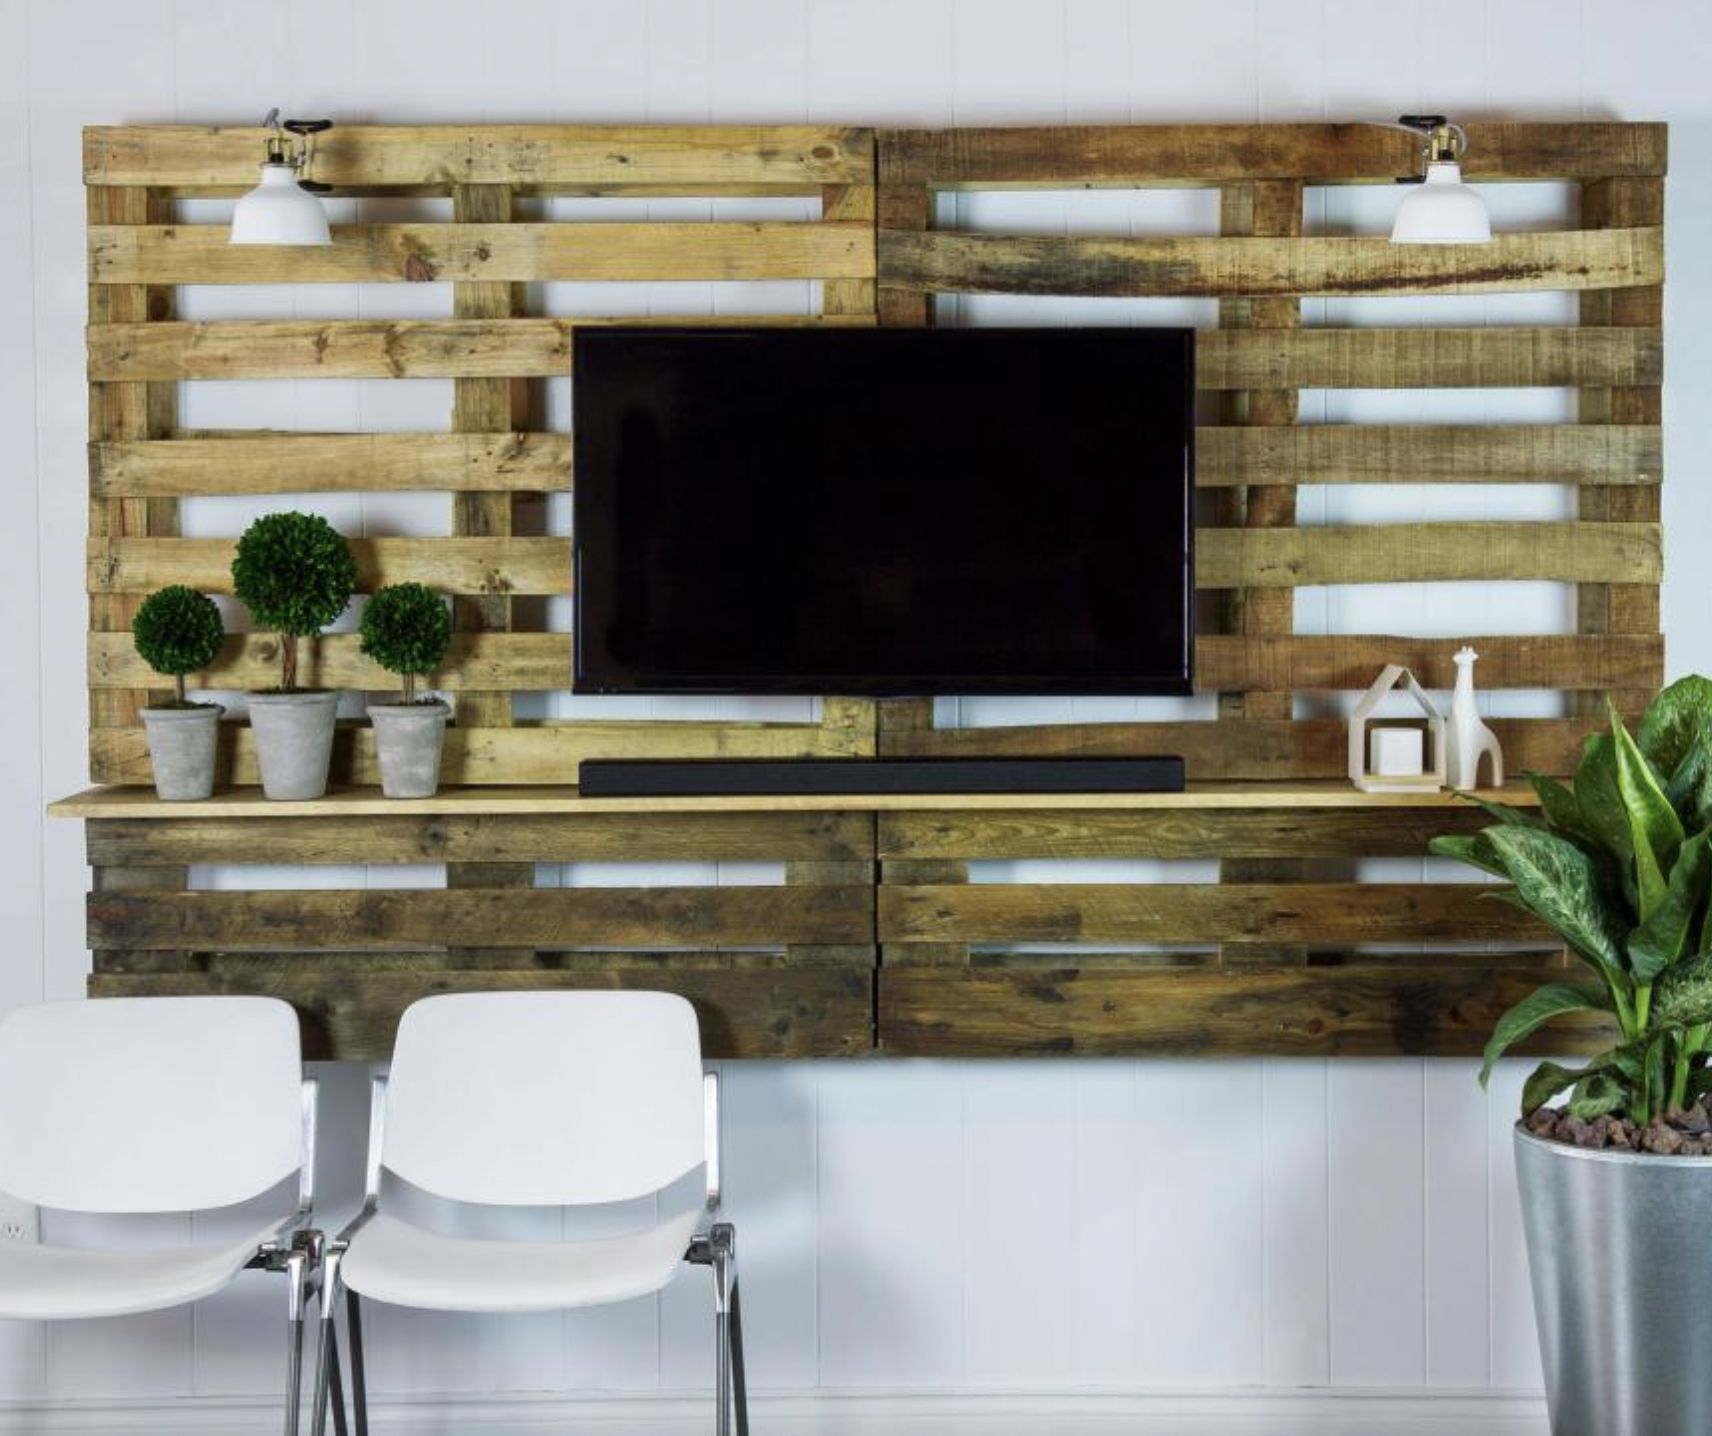 Rustic Pallet Panel For Minimalist TV Wall